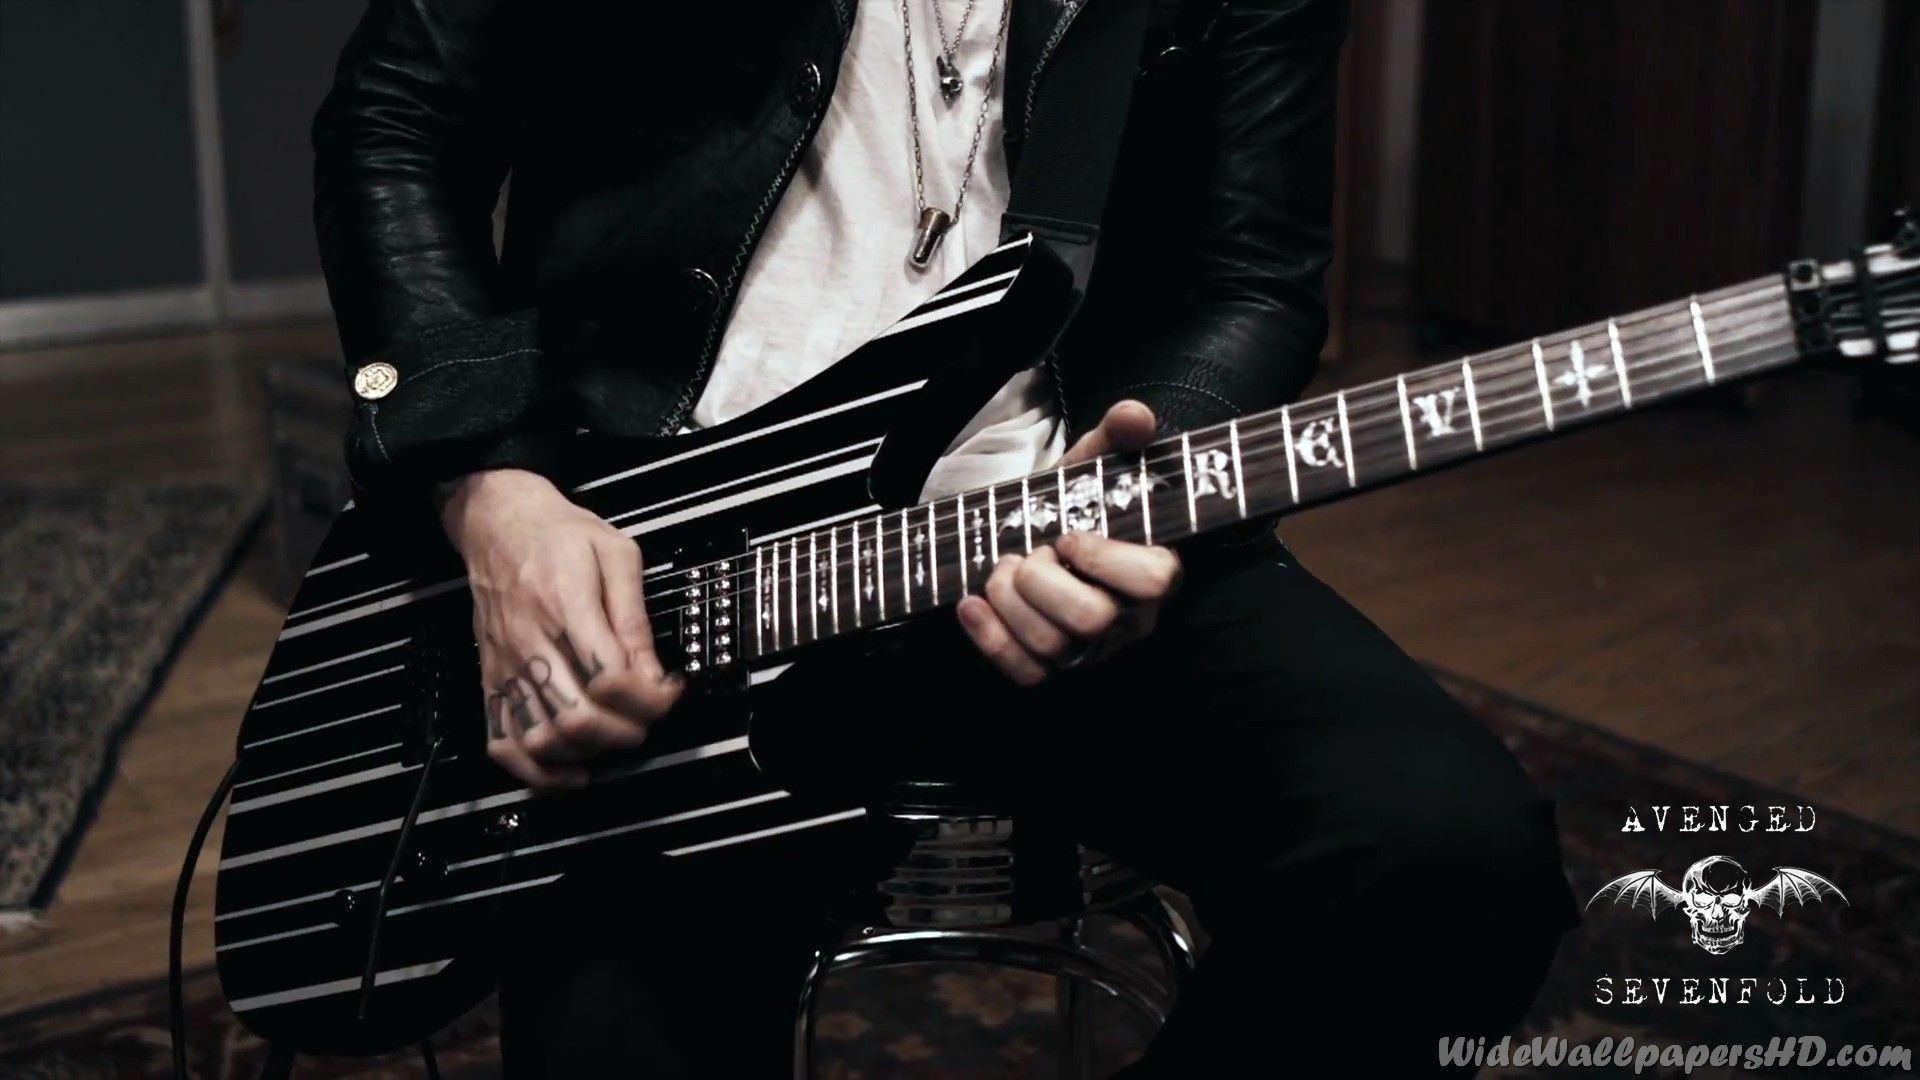 Synyster gates wallpaper